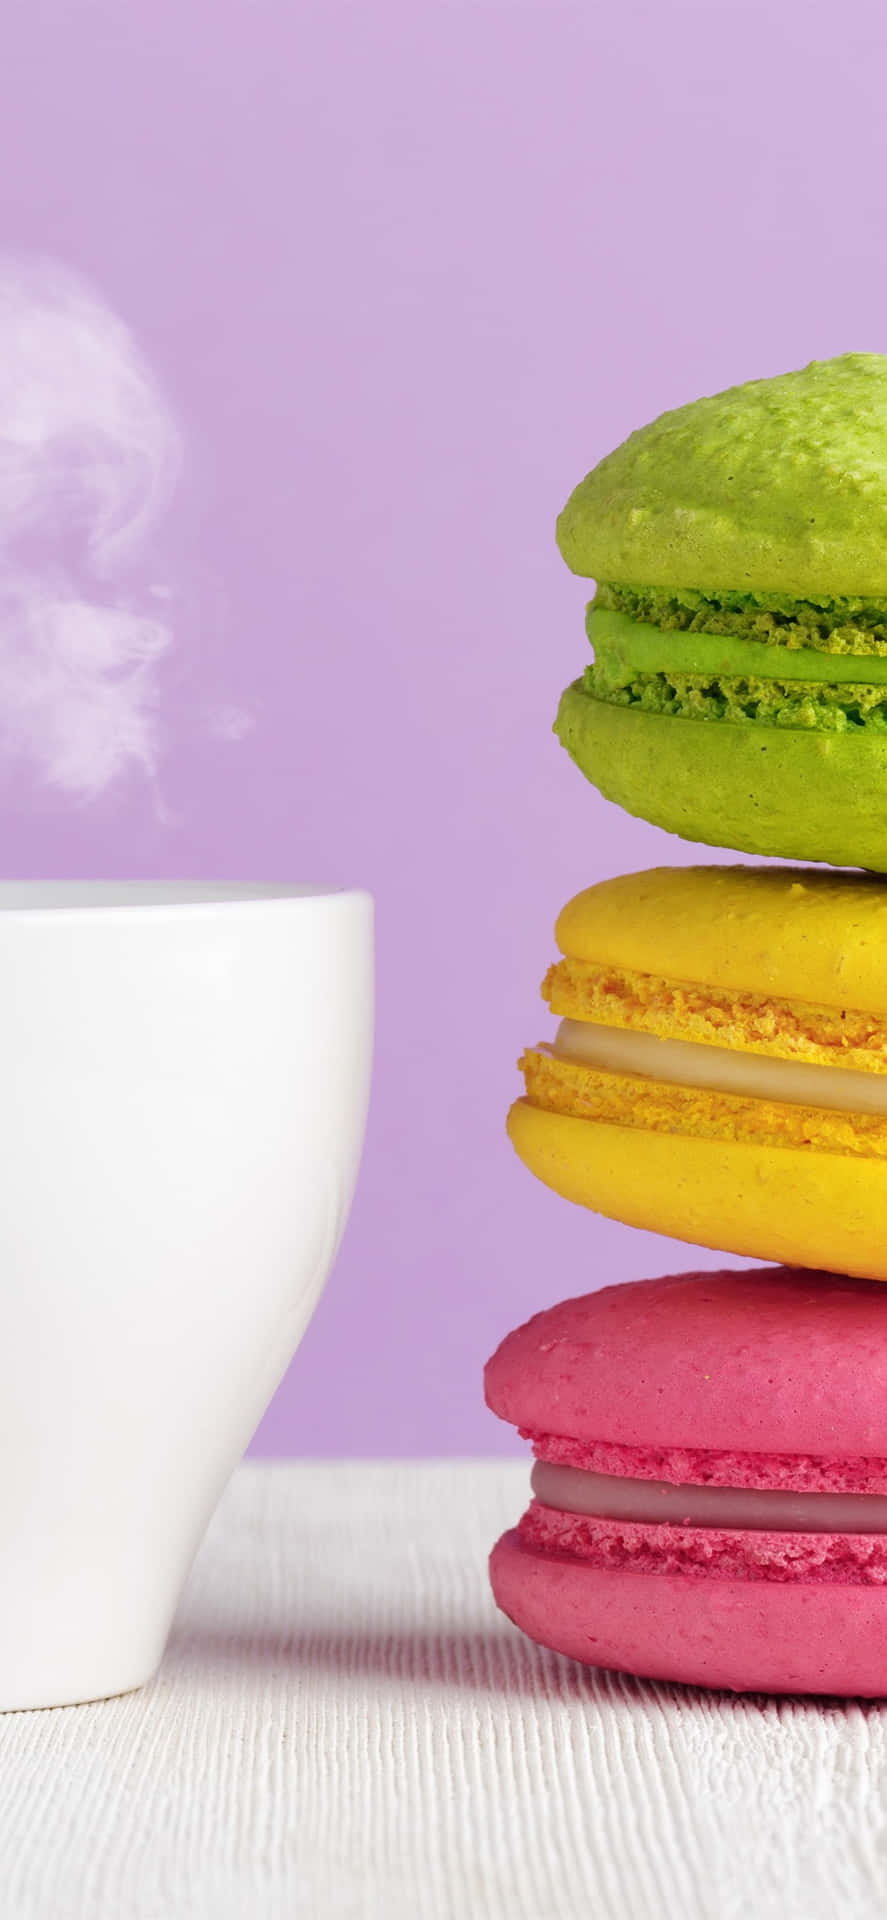 Indulge in the Rainbow - Vibrantly Colored Macarons stacked elegantly Wallpaper